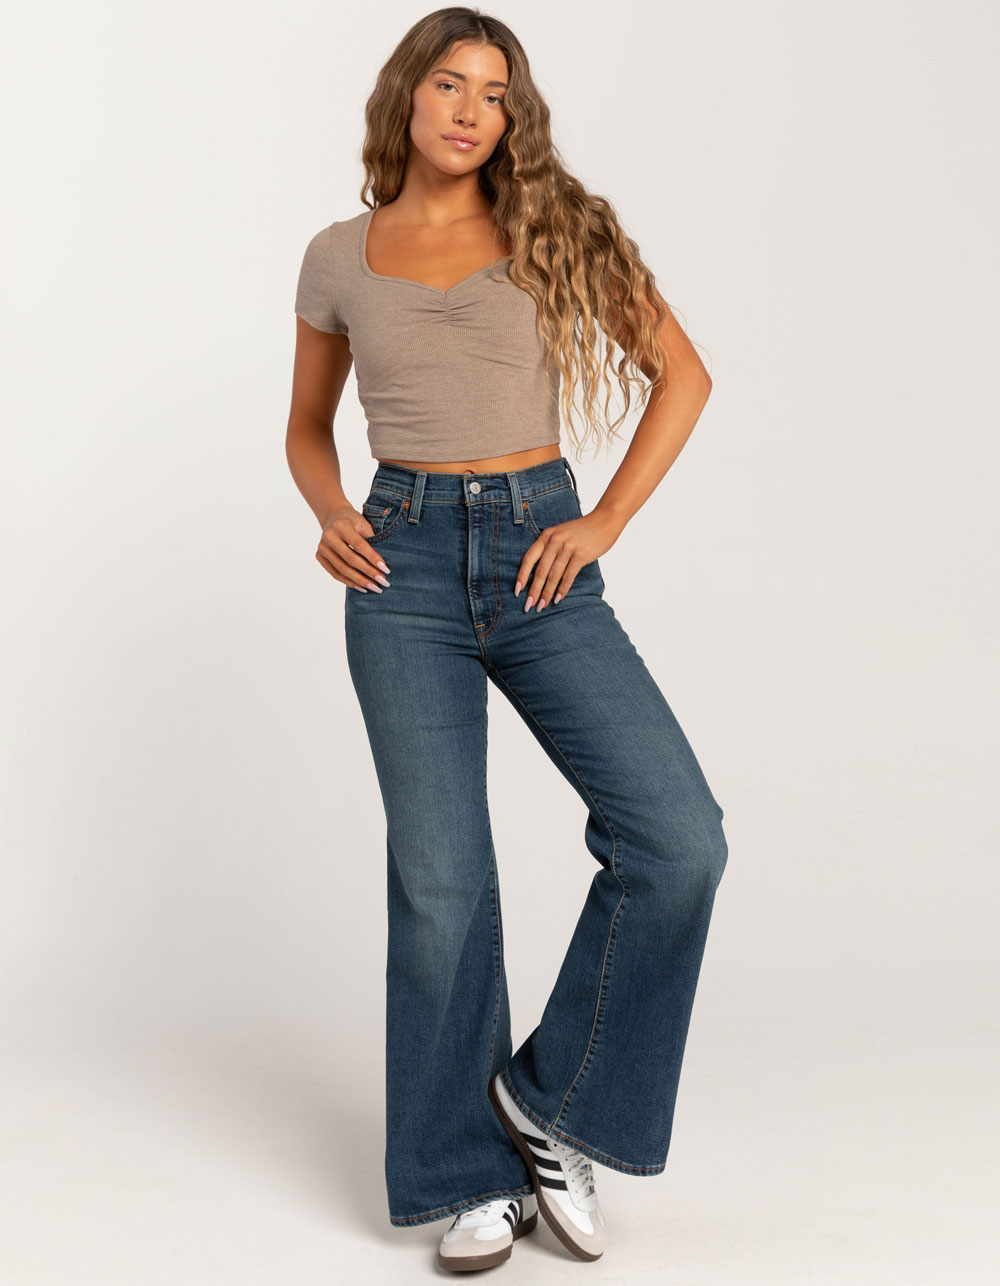 LEVI'S Ribcage Bell Womens Jeans - A New York Moment - VINTAGE MED | Tillys